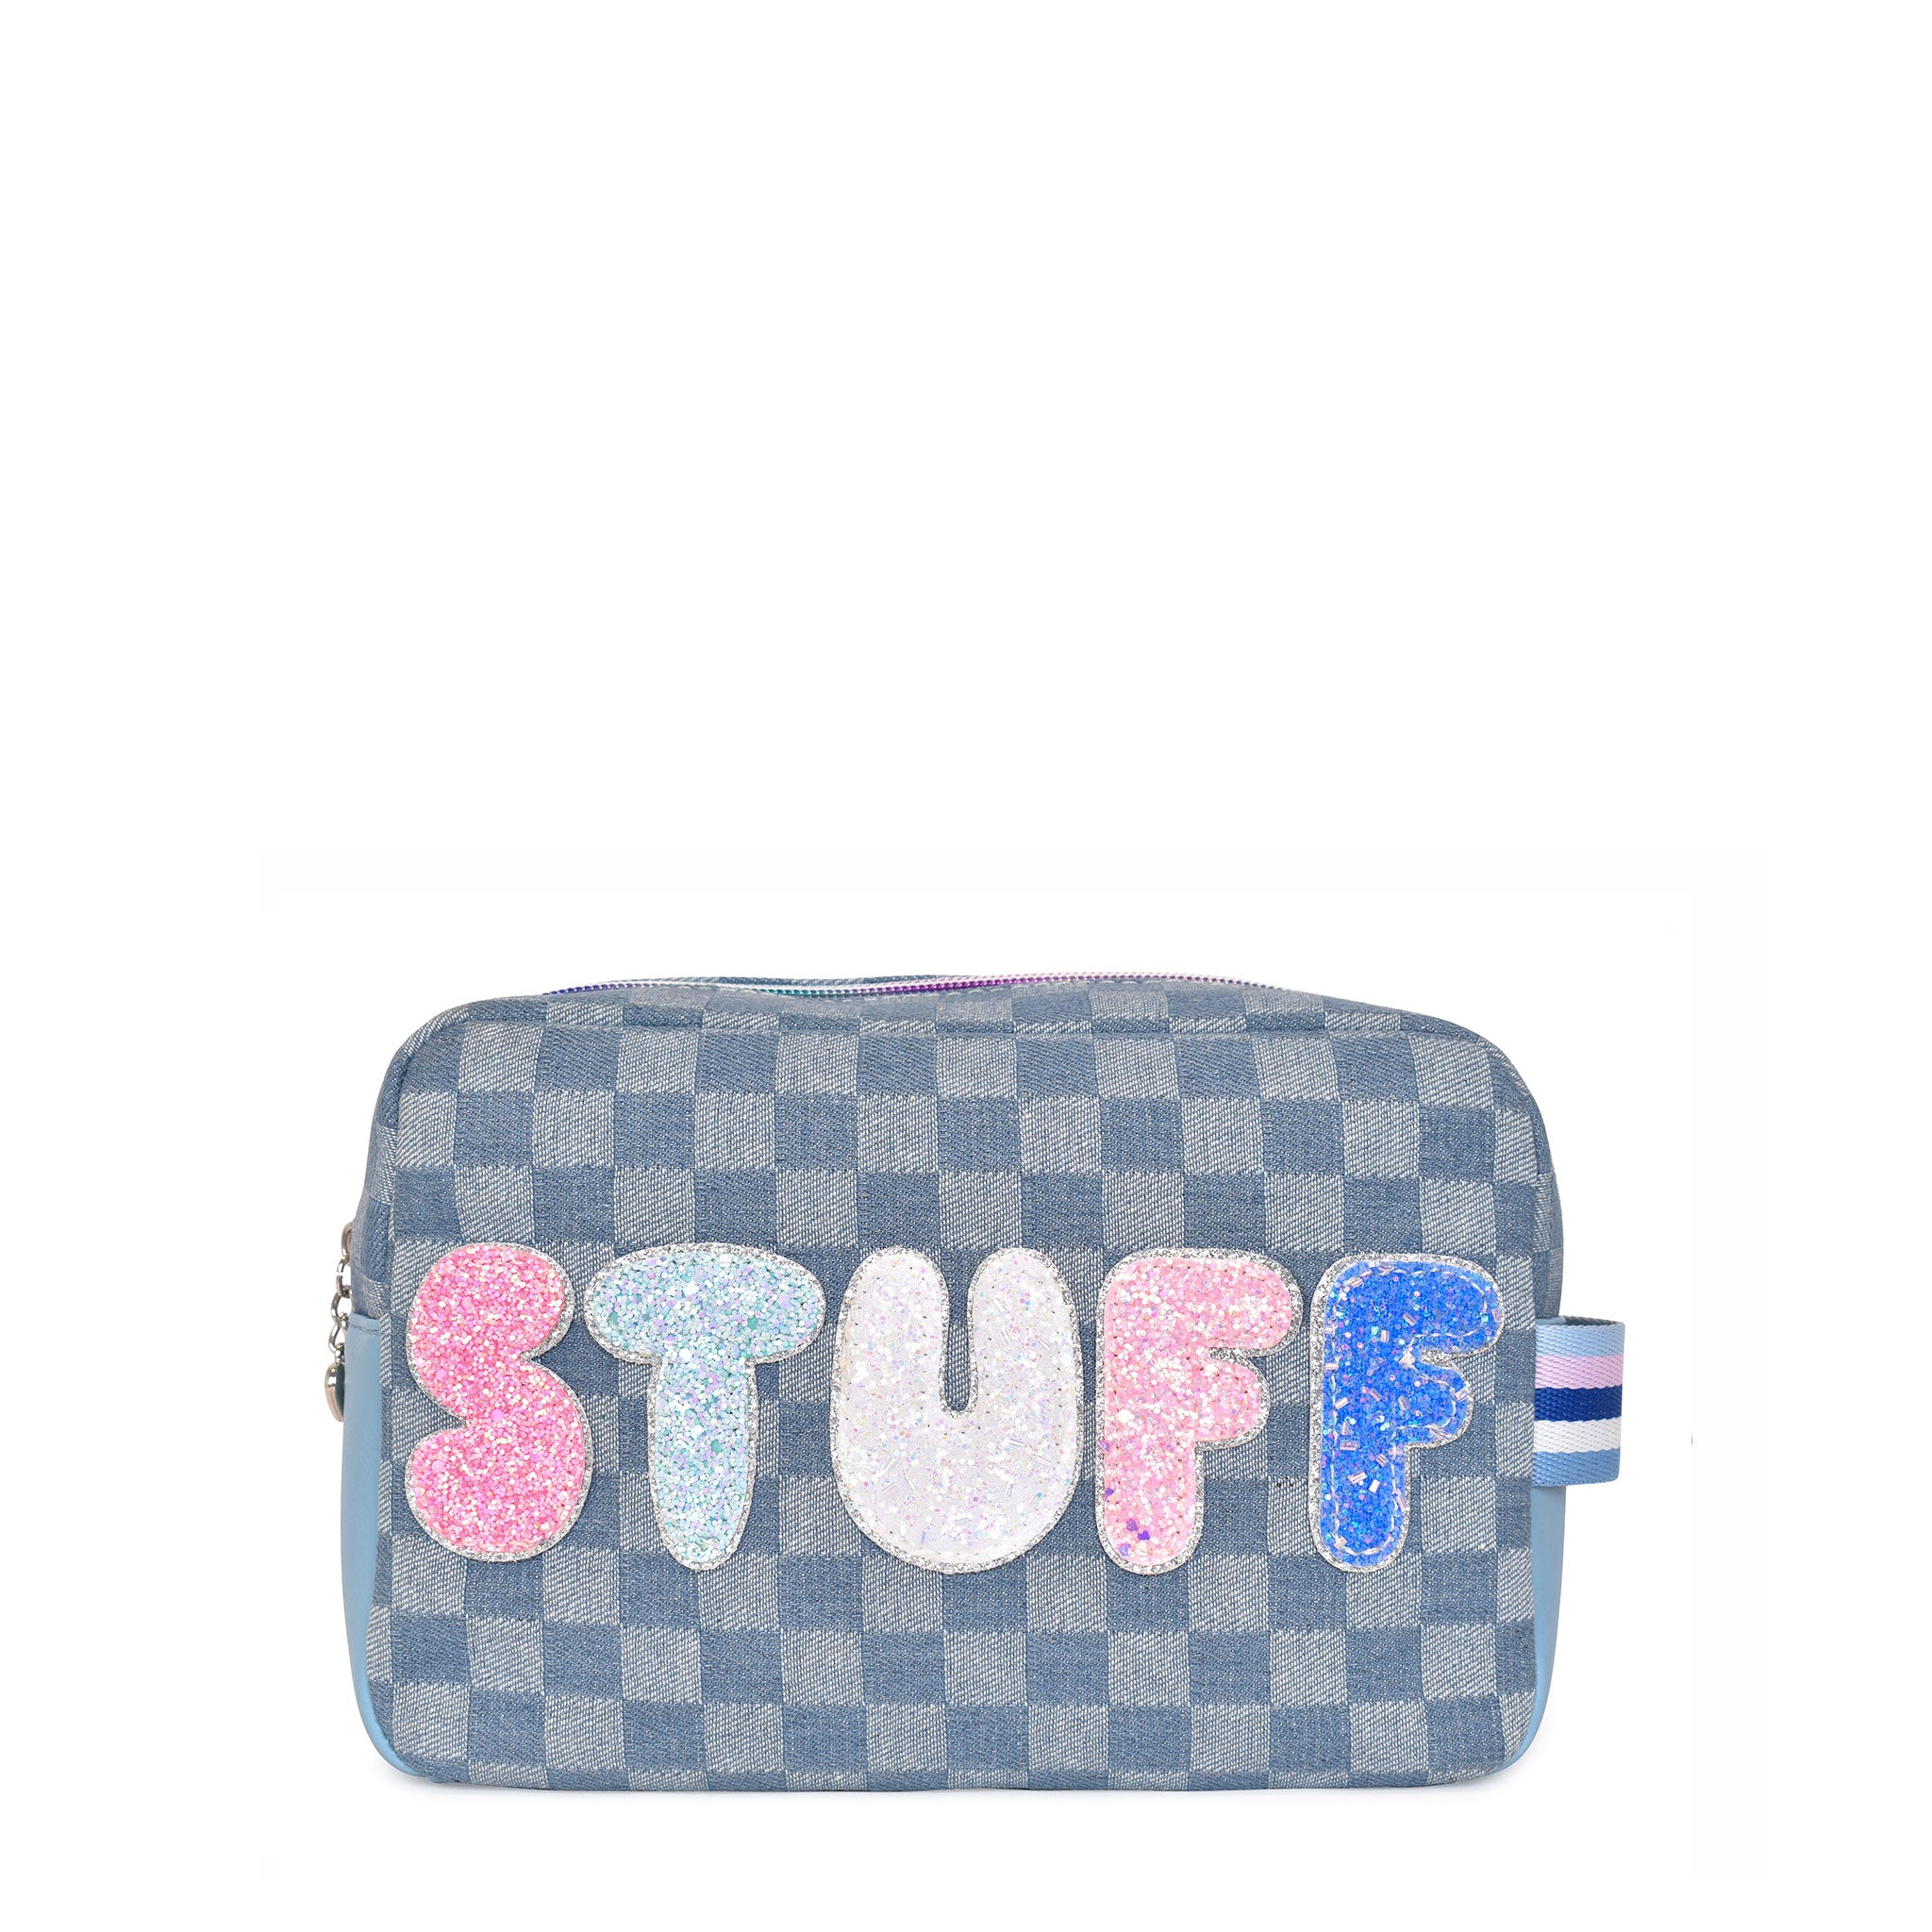 Front view of a denim checkerboard pouch with glitter bubble letters 'STUFF' appliqué 